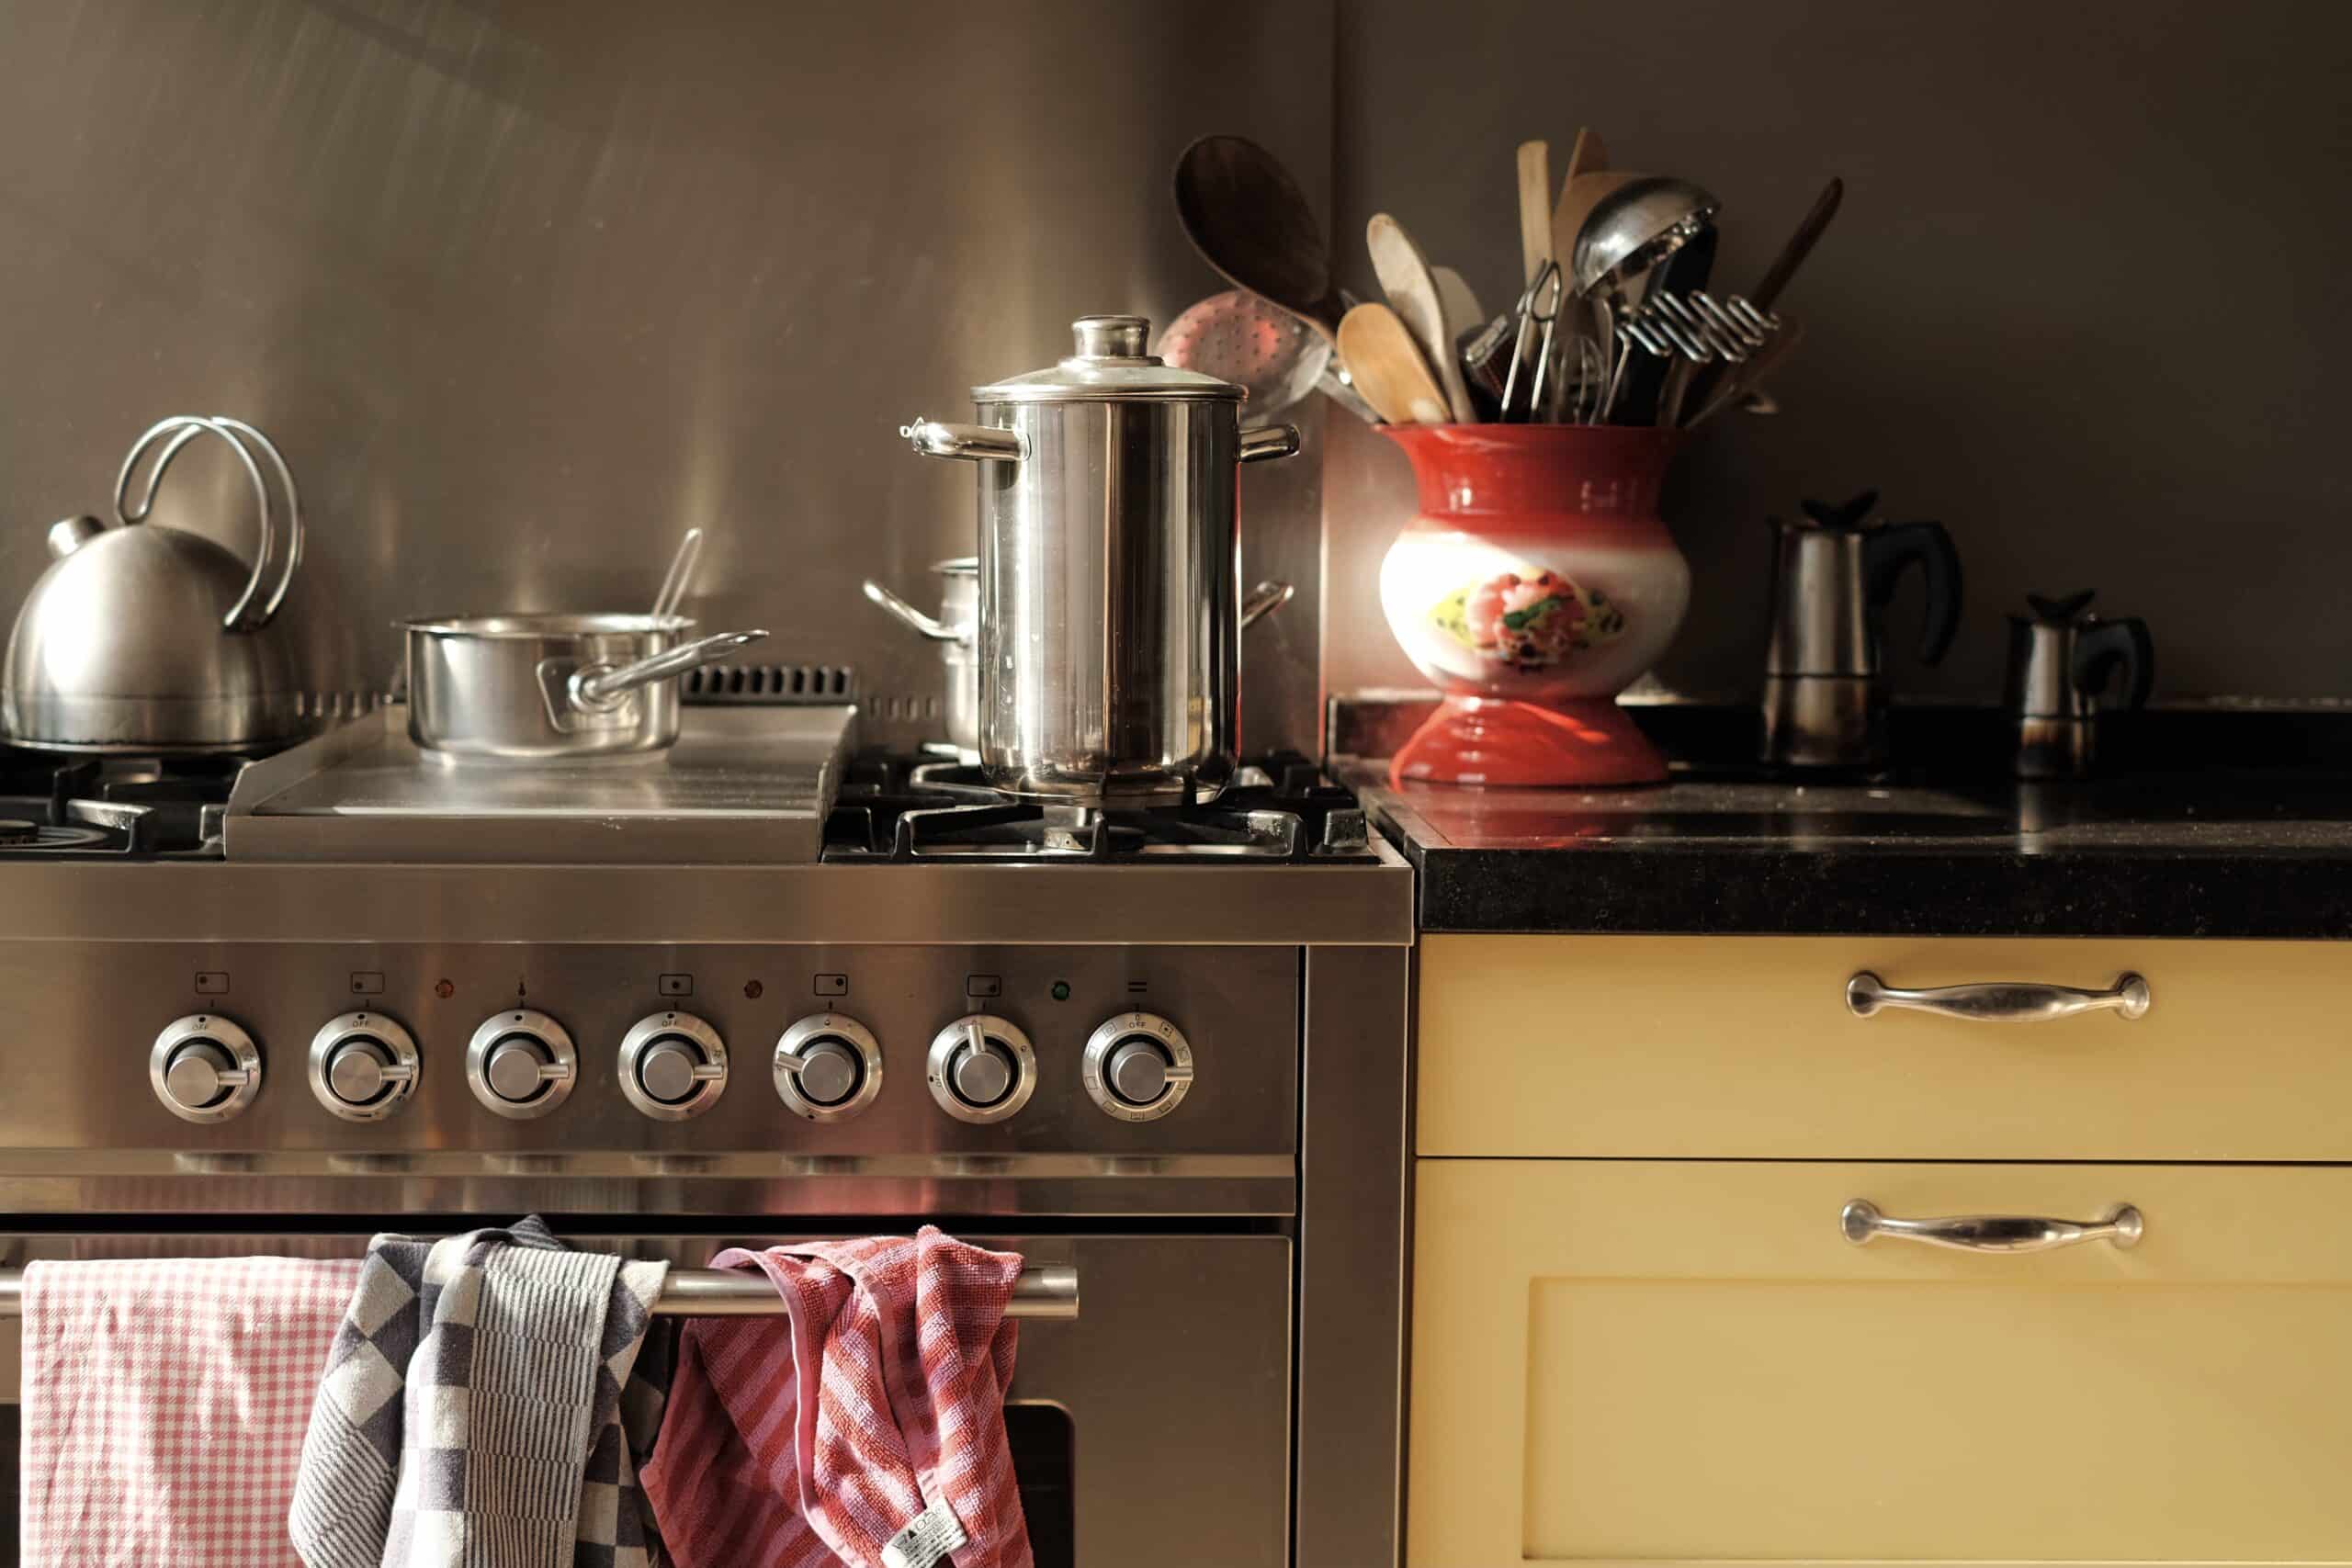 yellow-kitchen-and-stainless-steel-stove-with-pots-2021-09-02-14-42-09-utc